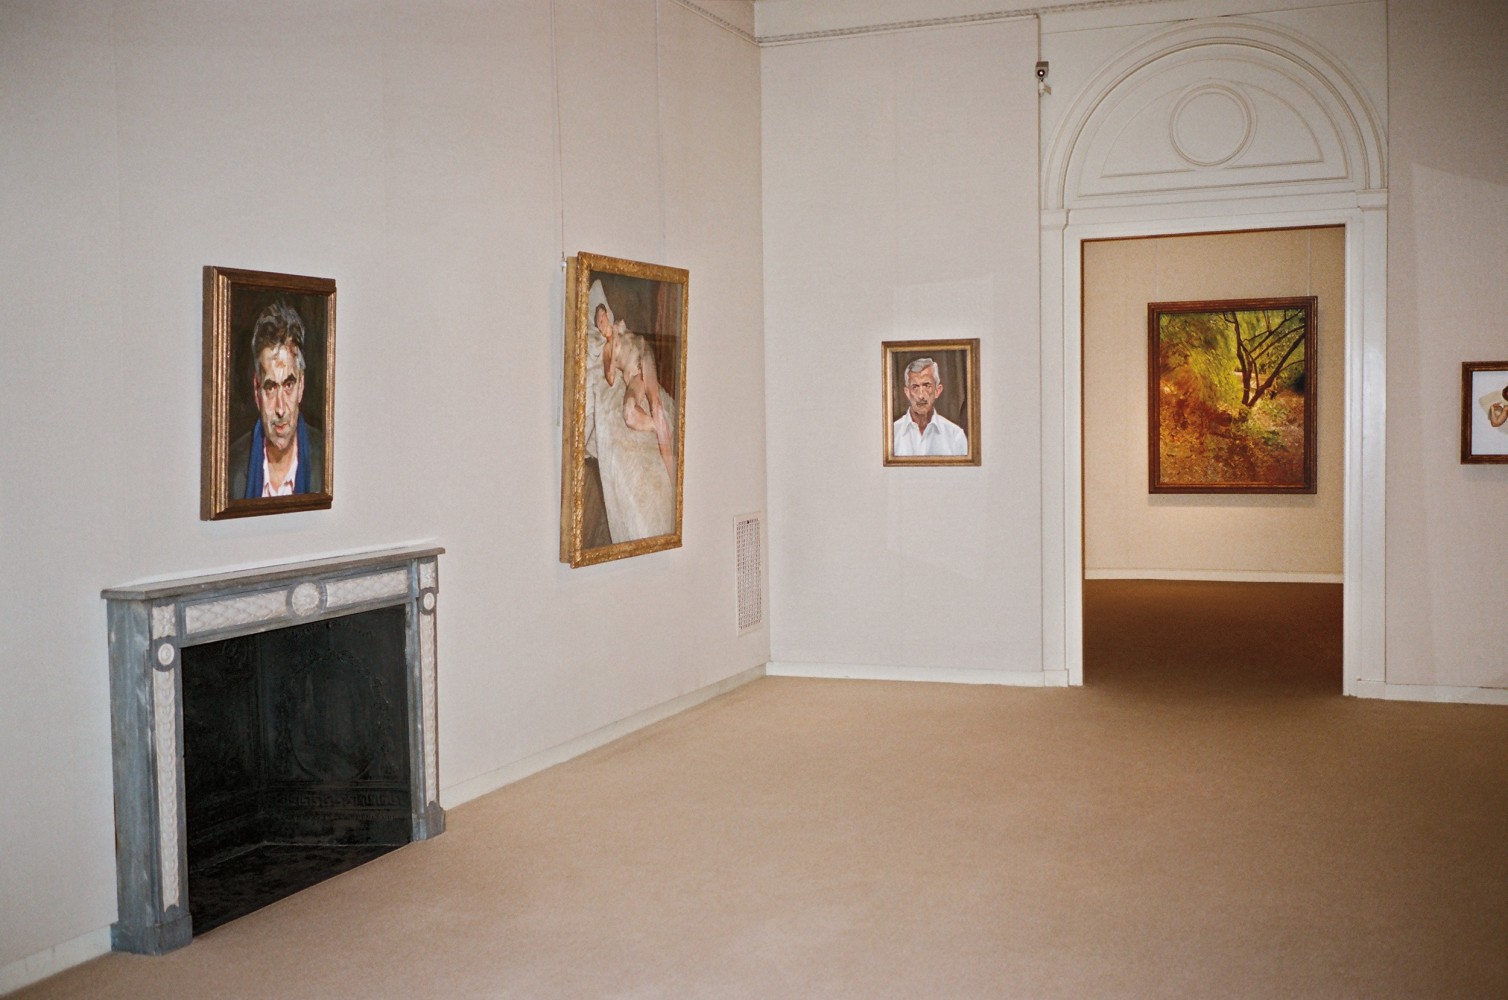 Installation view of Lucian Freud: Recent Work, 2006